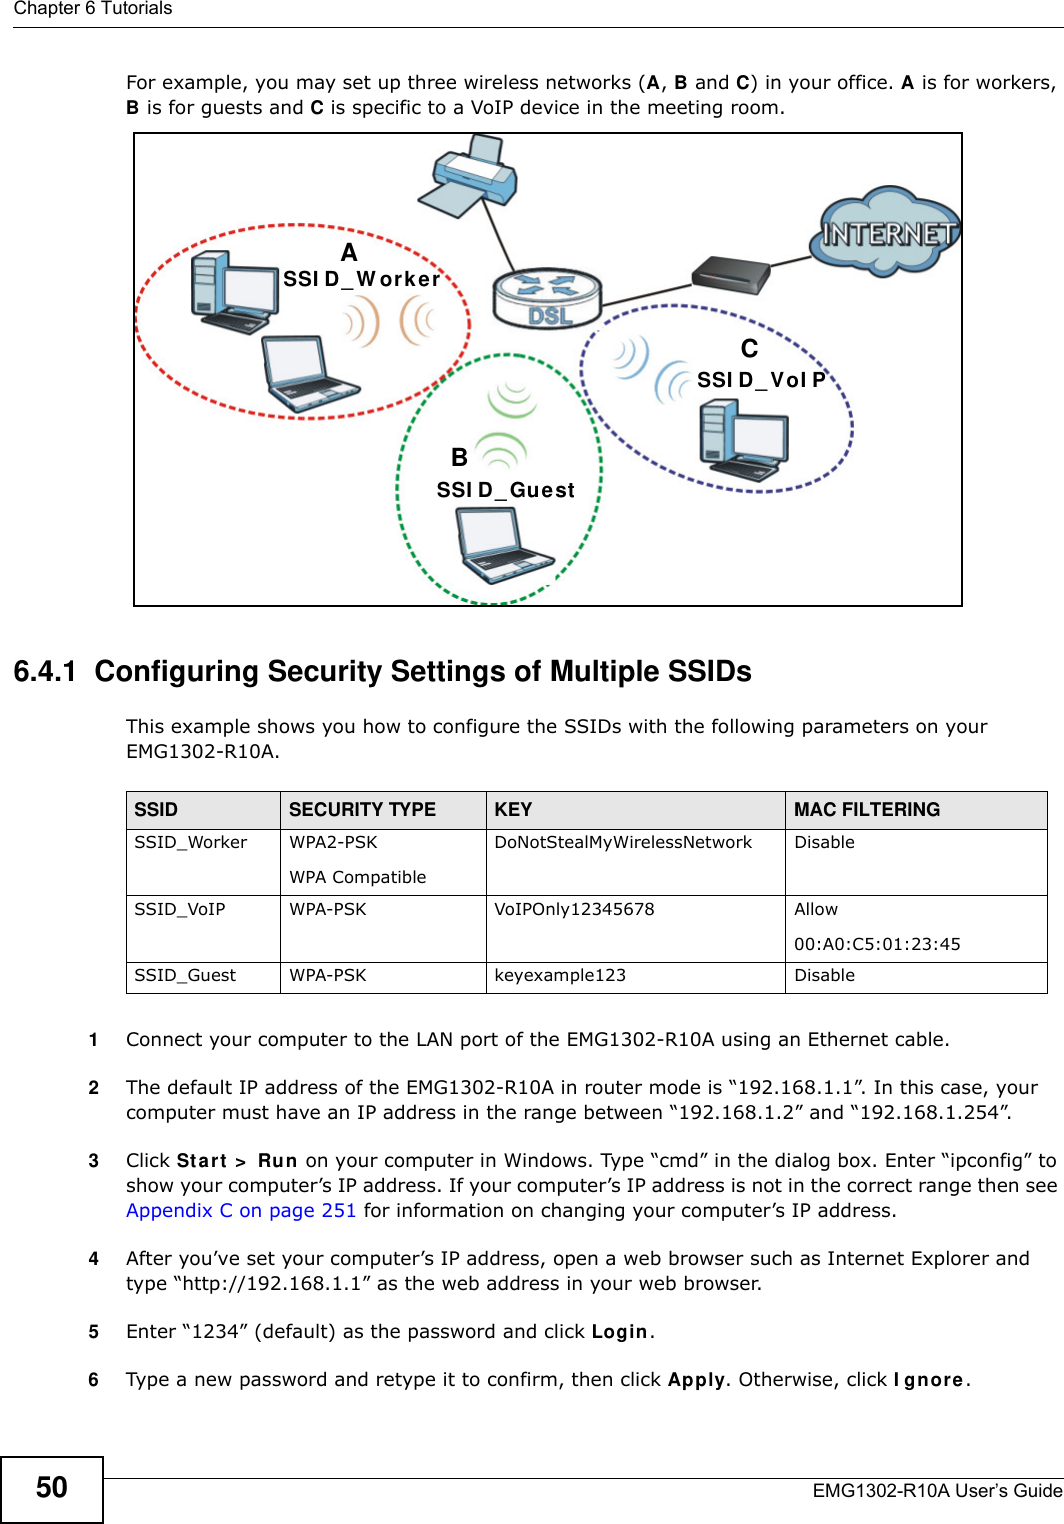 Chapter 6 TutorialsEMG1302-R10A User’s Guide50For example, you may set up three wireless networks (A, B and C) in your office. A is for workers, B is for guests and C is specific to a VoIP device in the meeting room. 6.4.1  Configuring Security Settings of Multiple SSIDsThis example shows you how to configure the SSIDs with the following parameters on your EMG1302-R10A.1Connect your computer to the LAN port of the EMG1302-R10A using an Ethernet cable. 2The default IP address of the EMG1302-R10A in router mode is “192.168.1.1”. In this case, your computer must have an IP address in the range between “192.168.1.2” and “192.168.1.254”.3Click St ar t  &gt;  Run on your computer in Windows. Type “cmd” in the dialog box. Enter “ipconfig” to show your computer’s IP address. If your computer’s IP address is not in the correct range then see Appendix C on page 251 for information on changing your computer’s IP address.4After you’ve set your computer’s IP address, open a web browser such as Internet Explorer and type “http://192.168.1.1” as the web address in your web browser.5Enter “1234” (default) as the password and click Login.6Type a new password and retype it to confirm, then click Apply. Otherwise, click I gnor e .ABCSSI D_ GuestSSI D _ W orkerSSI D _ VoI PSSID SECURITY TYPE KEY MAC FILTERINGSSID_Worker WPA2-PSKWPA Compatible DoNotStealMyWirelessNetwork DisableSSID_VoIP WPA-PSK VoIPOnly12345678 Allow00:A0:C5:01:23:45SSID_Guest WPA-PSK keyexample123 Disable